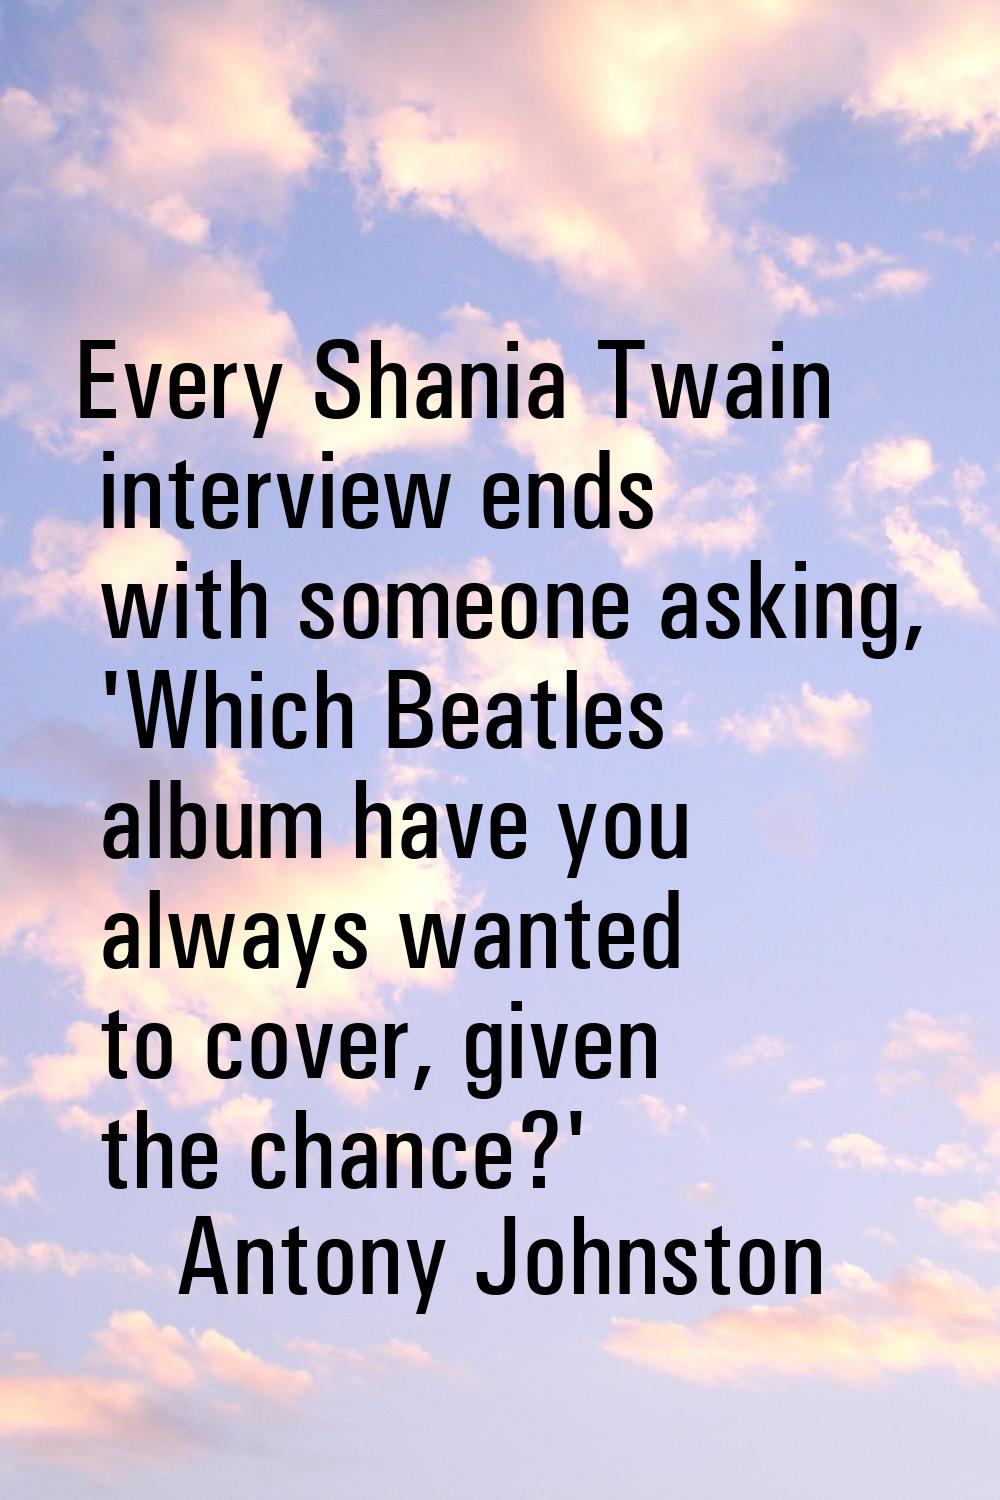 Every Shania Twain interview ends with someone asking, 'Which Beatles album have you always wanted 